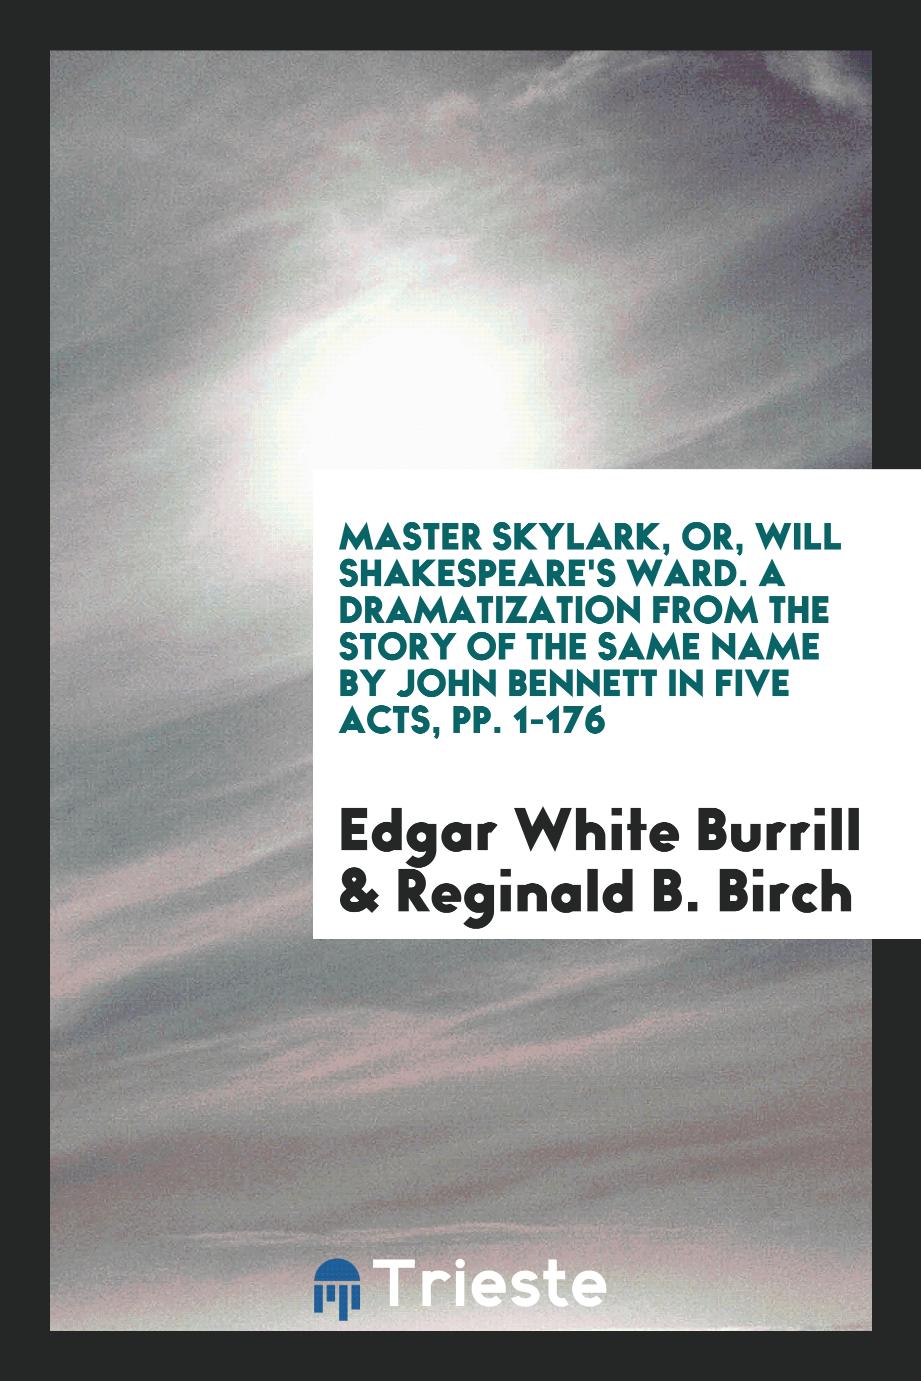 Master Skylark, or, Will Shakespeare's Ward. A Dramatization from the Story of the Same Name by John Bennett in Five Acts, pp. 1-176